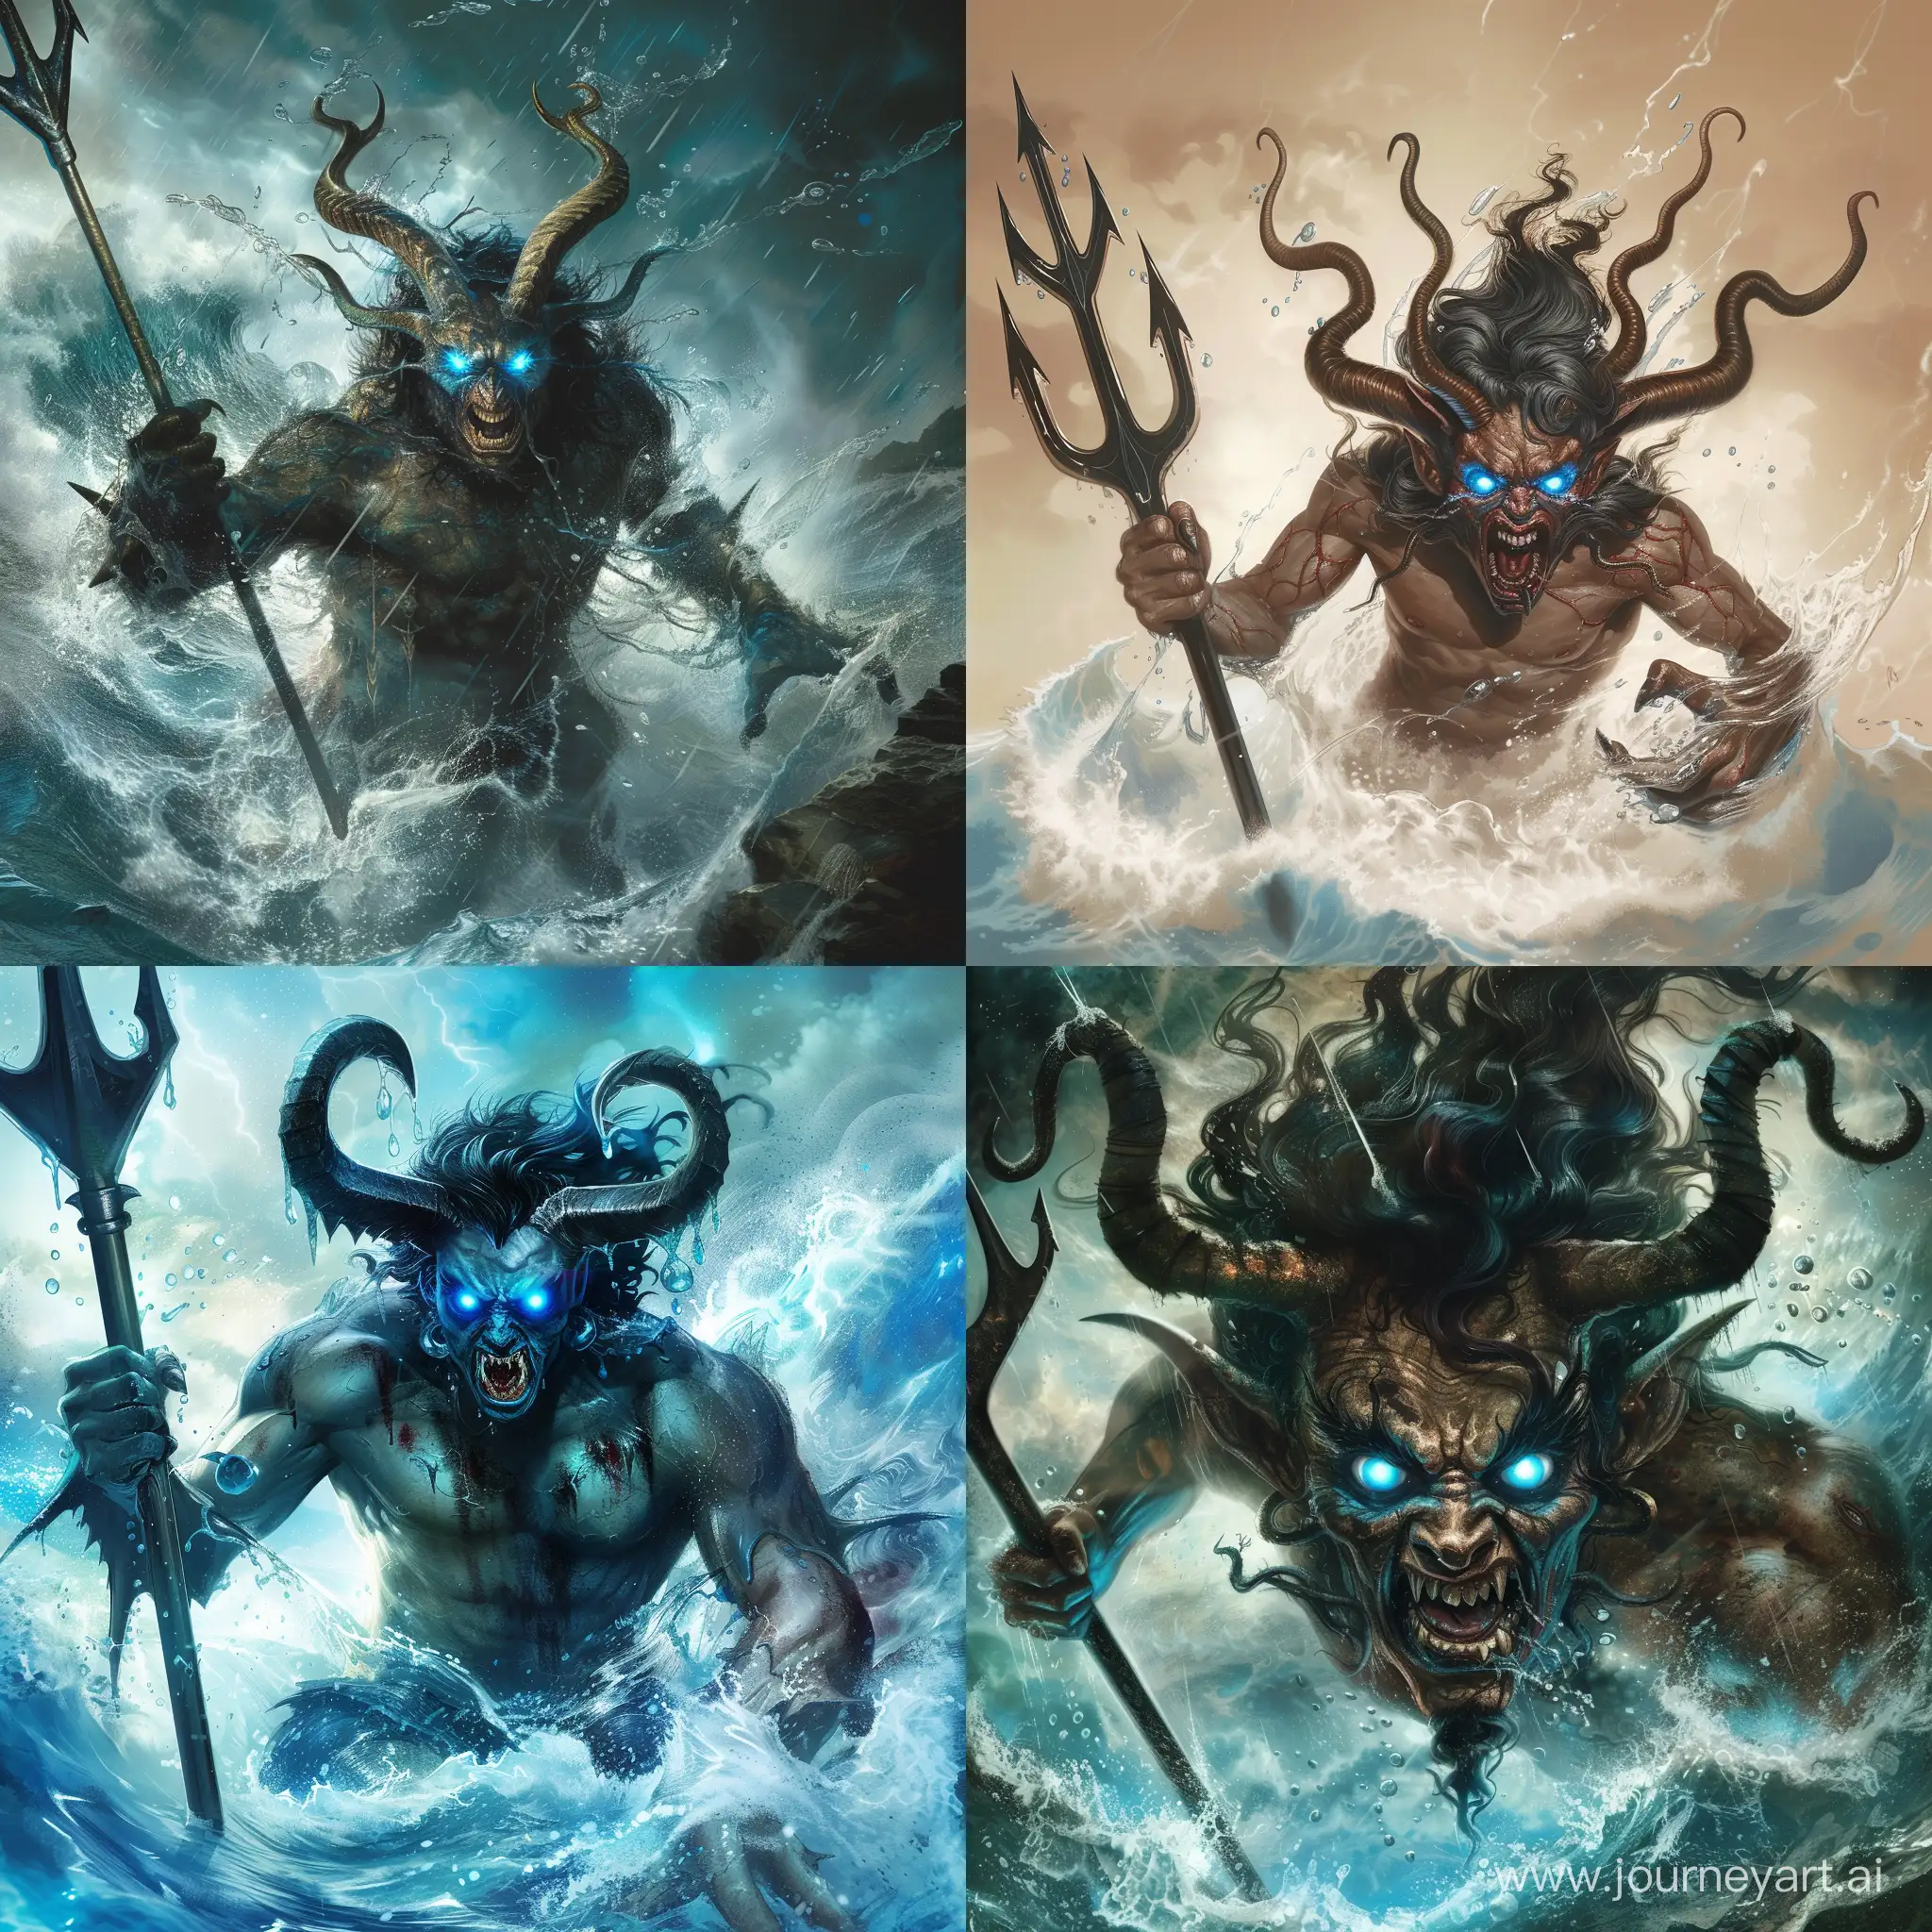 Demon of water full-length with dark-brained hair blue glowing eyes in a rage with six horns and a trident